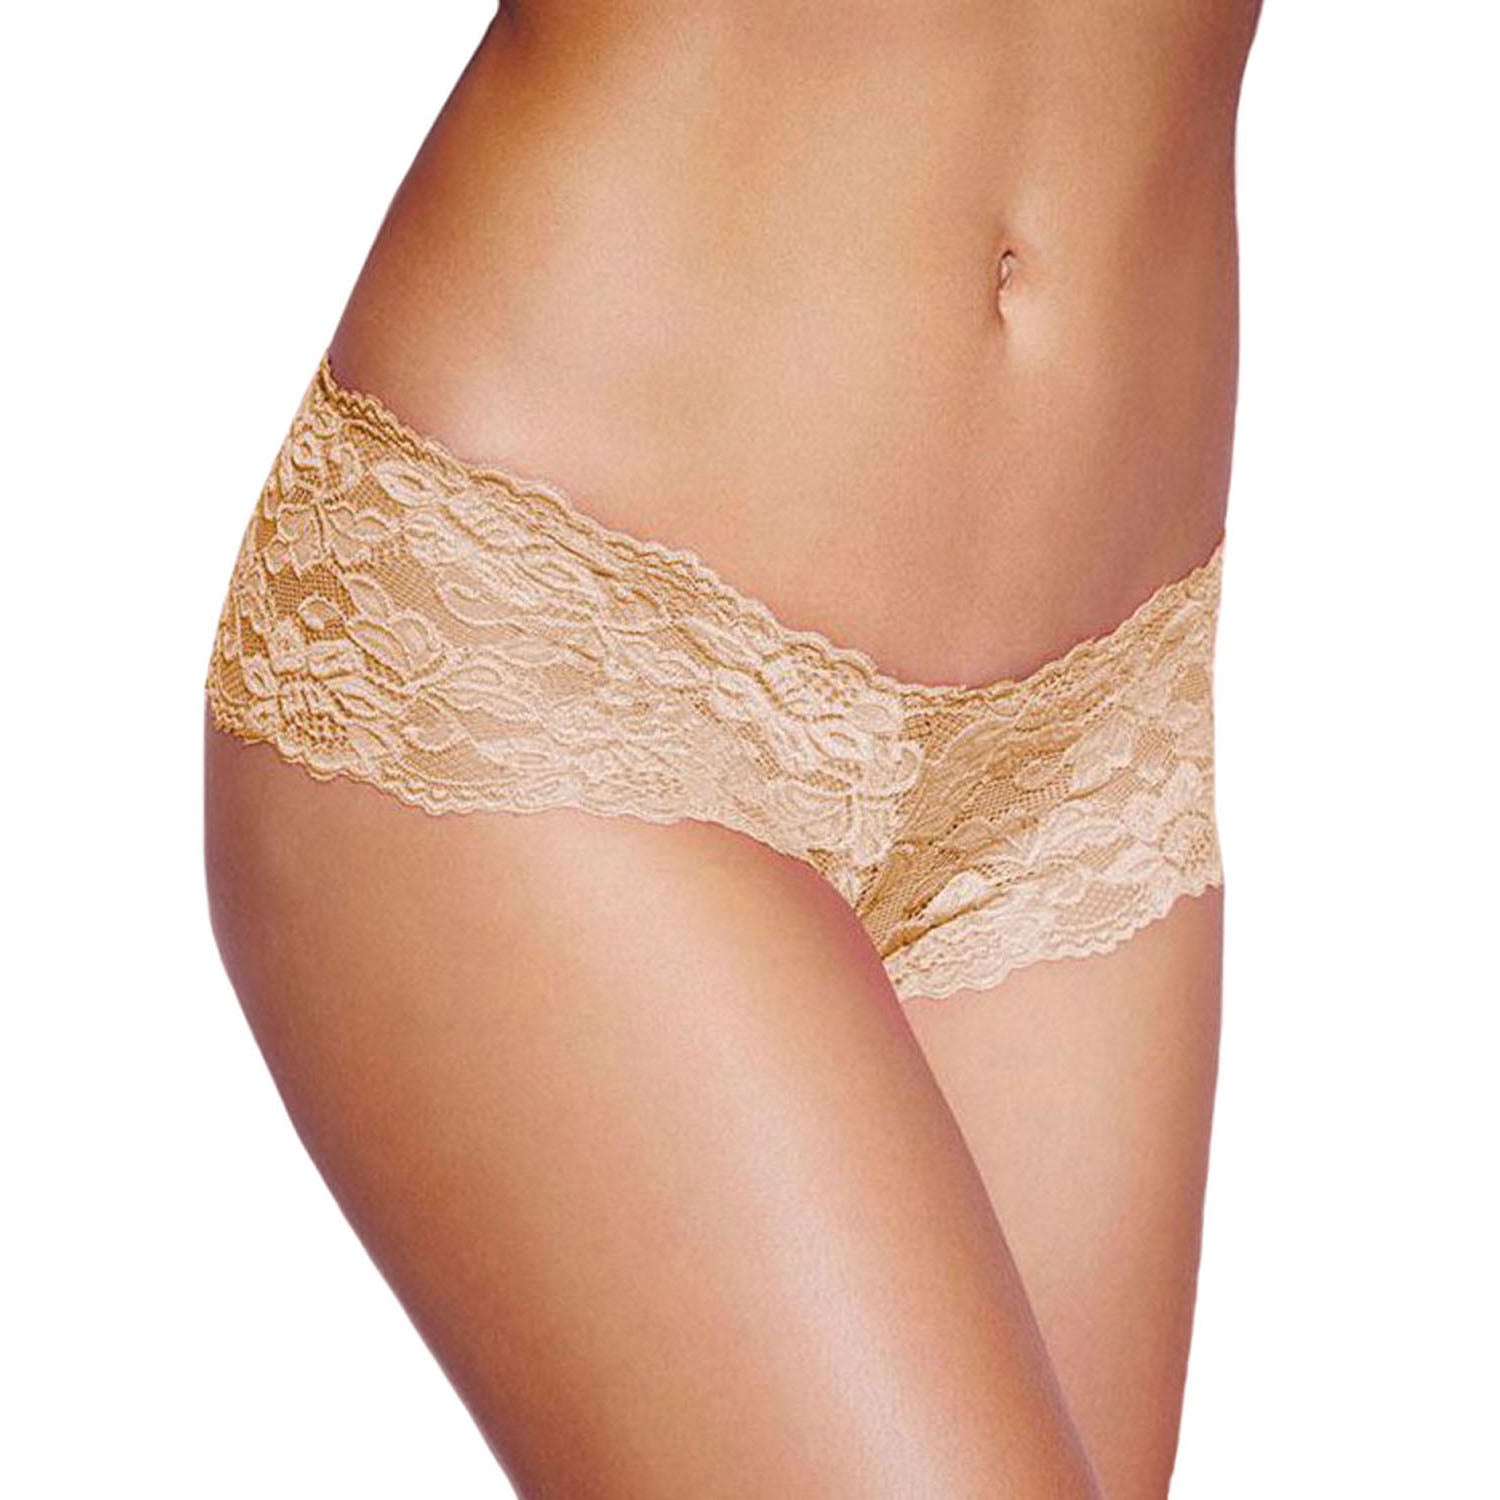 Simply Joshimo Floral Lace French Knickers with Gusset (Beige)